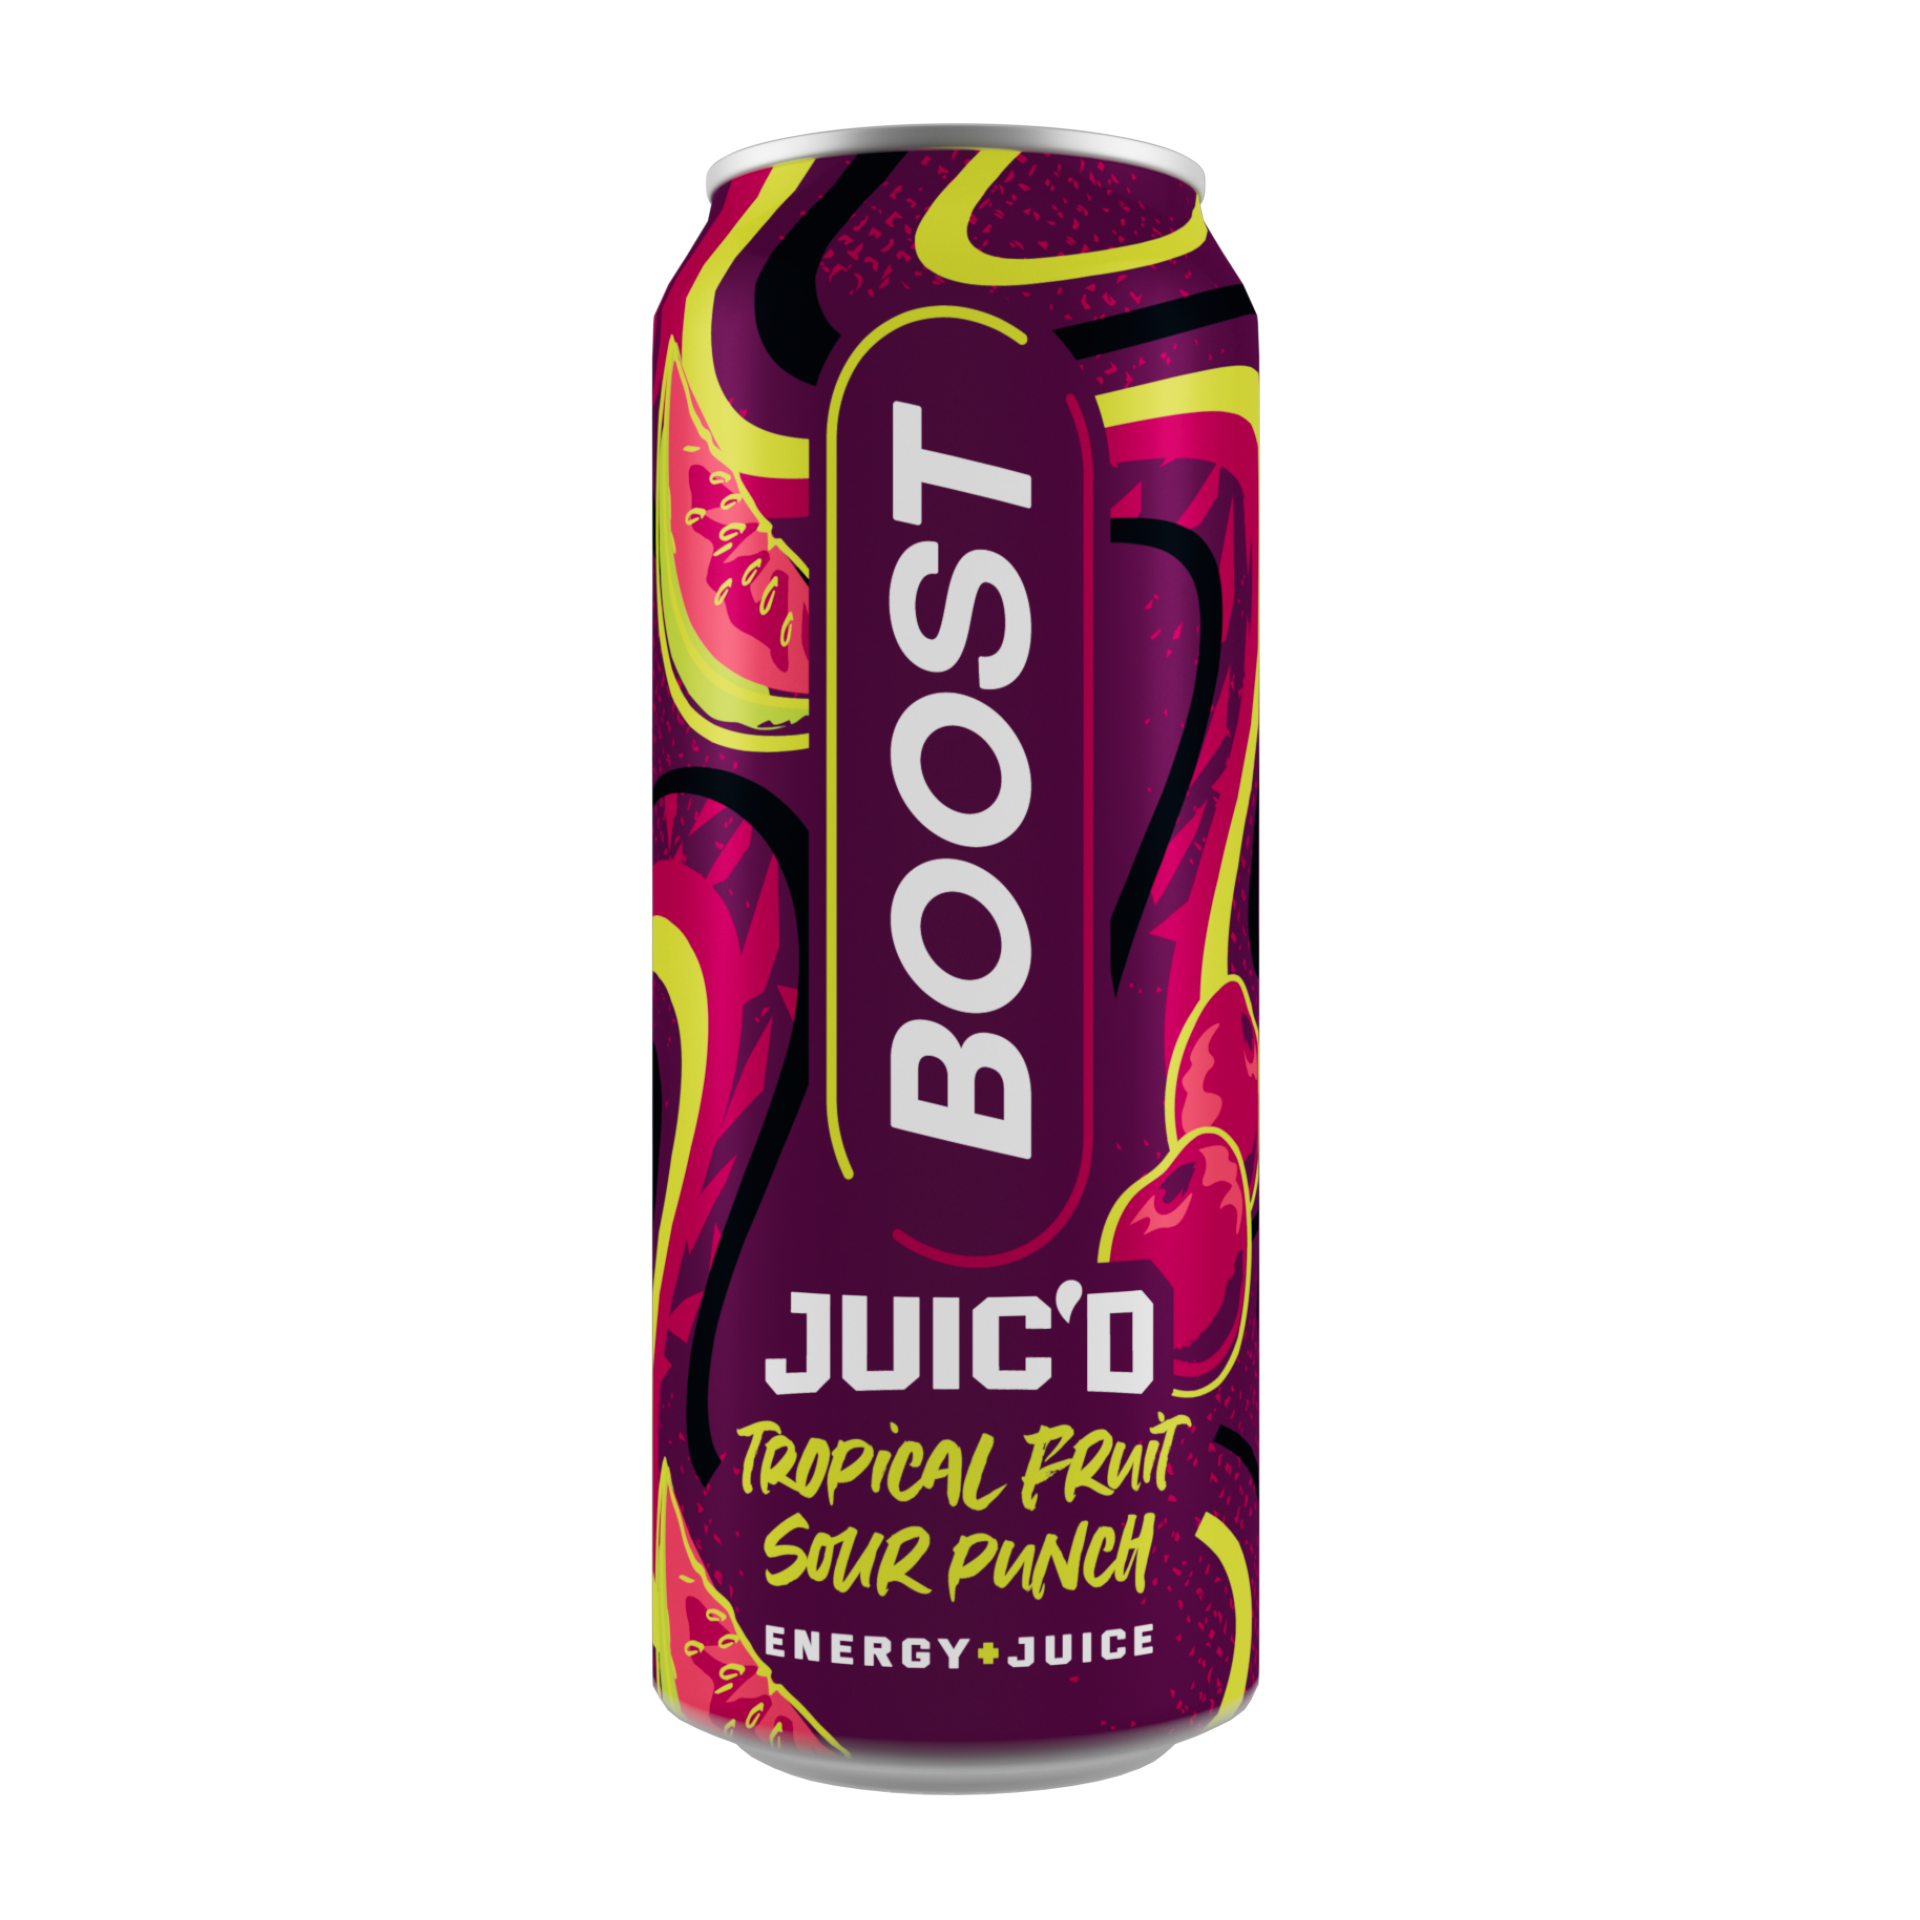 Boost_2023_Juicd_TropicalSour_500ml_NPM_RGB_1920x1920px_AW